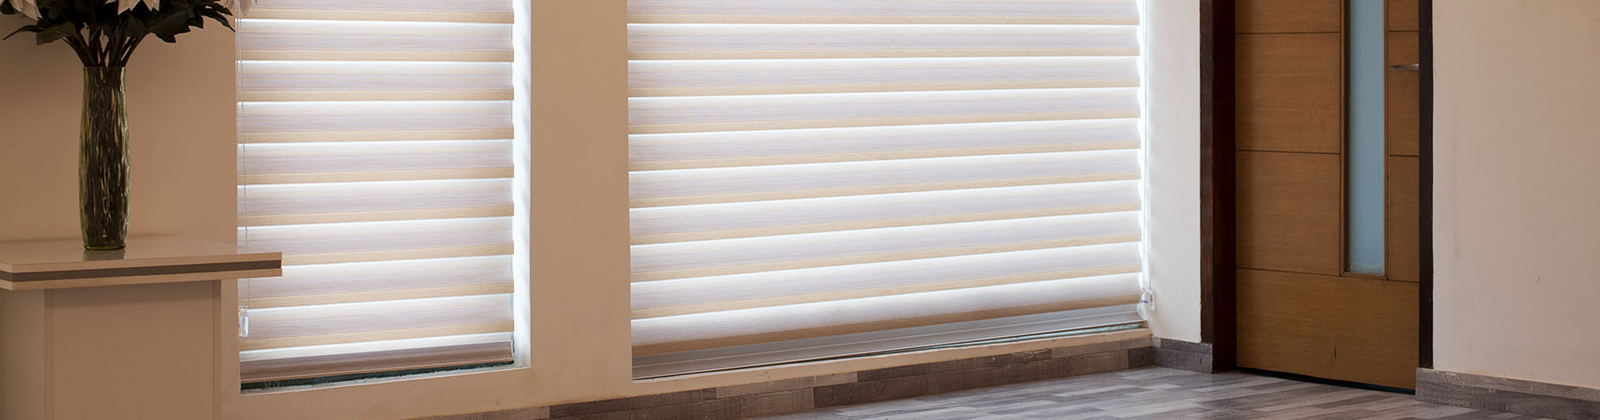 contour blinds supplier in india